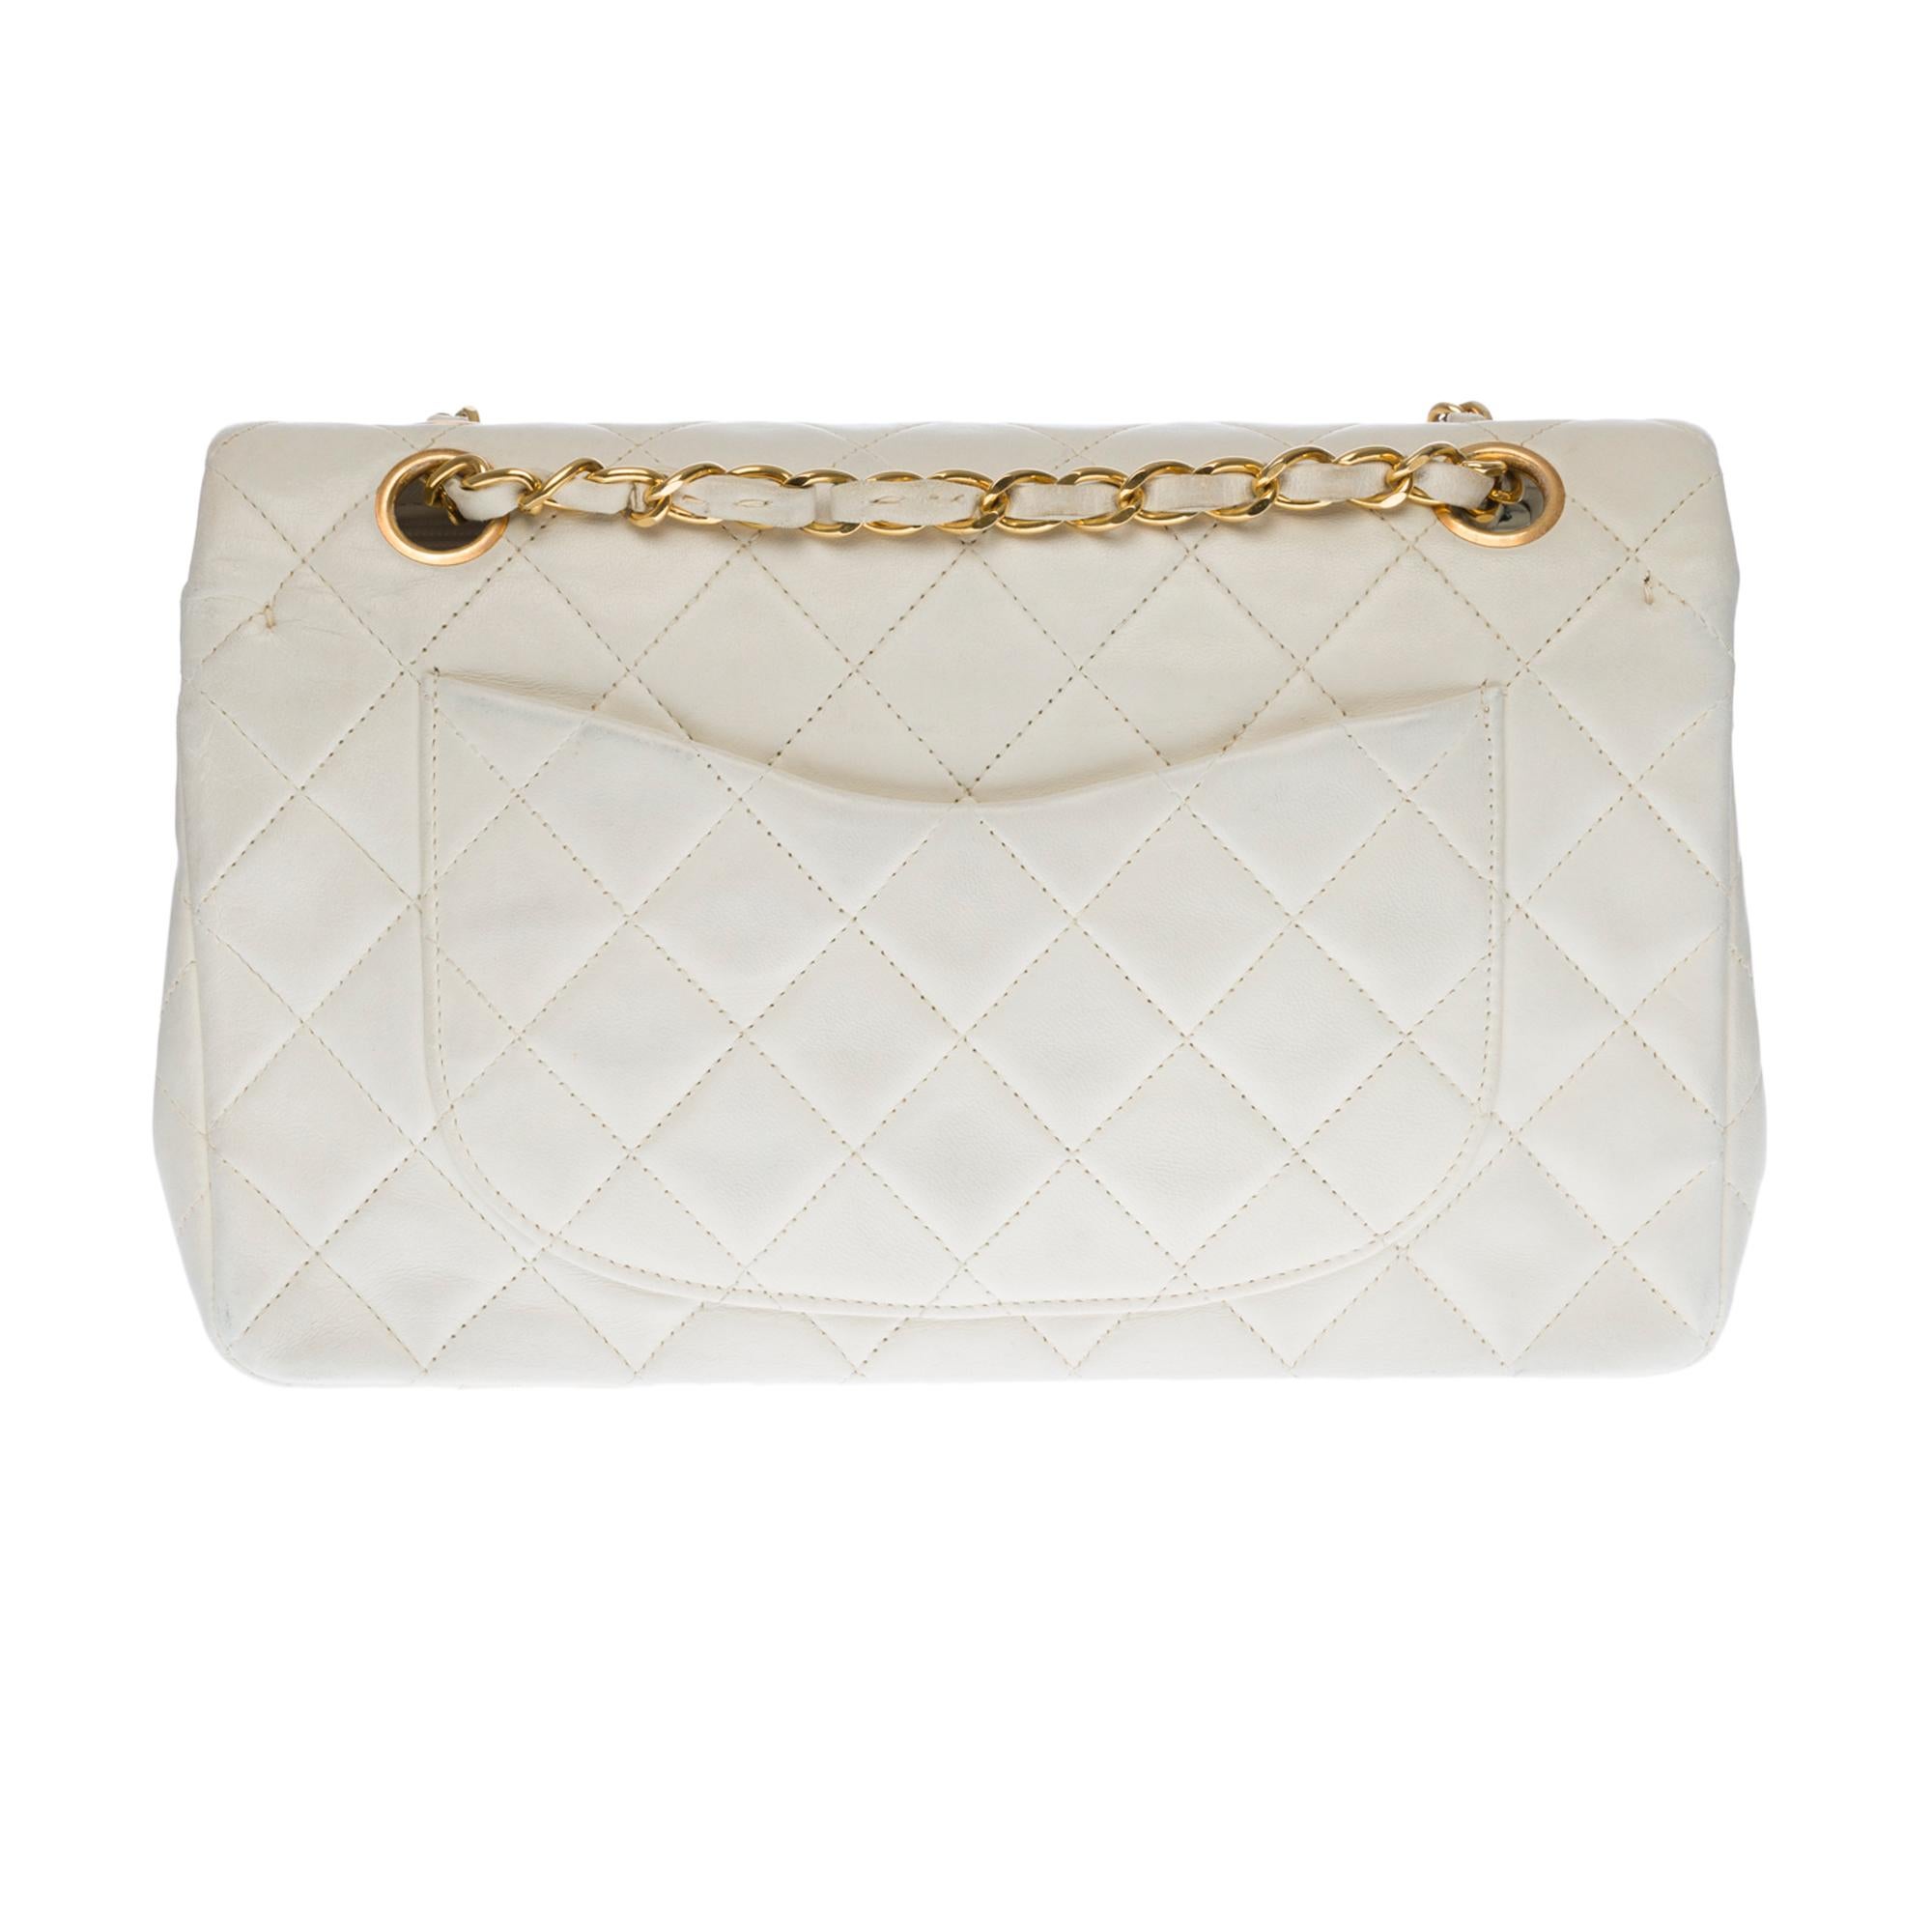 Beautiful Chanel Timeless Medium 23cm handbag with double flap in white quilted lambskin leather, gold metal hardware, a golden metal chain handle intertwined with white leather allowing a hand or shoulder support.
Closure with gold metal